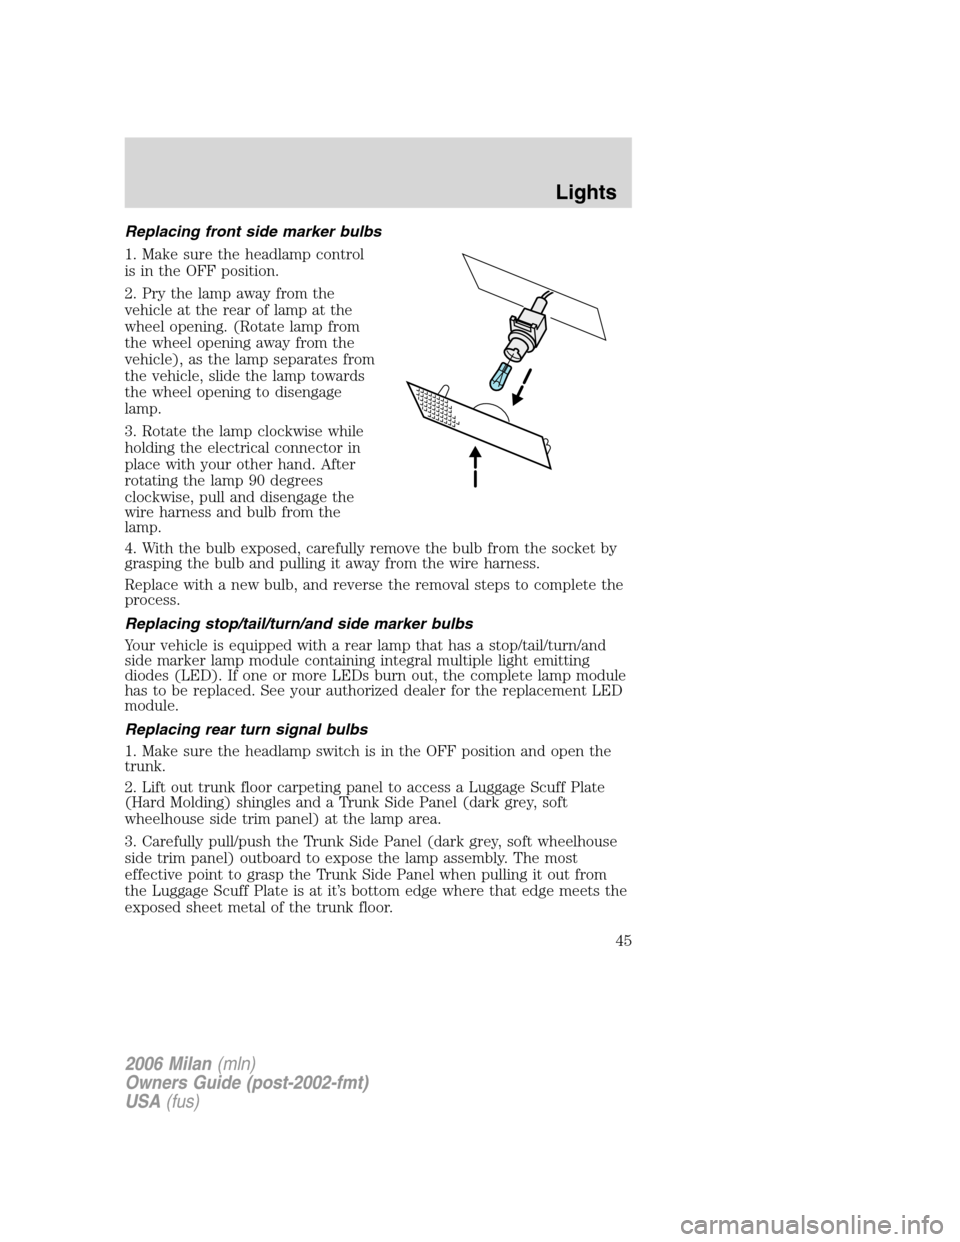 Mercury Milan 2006  Owners Manuals Replacing front side marker bulbs
1. Make sure the headlamp control
is in the OFF position.
2. Pry the lamp away from the
vehicle at the rear of lamp at the
wheel opening. (Rotate lamp from
the wheel 